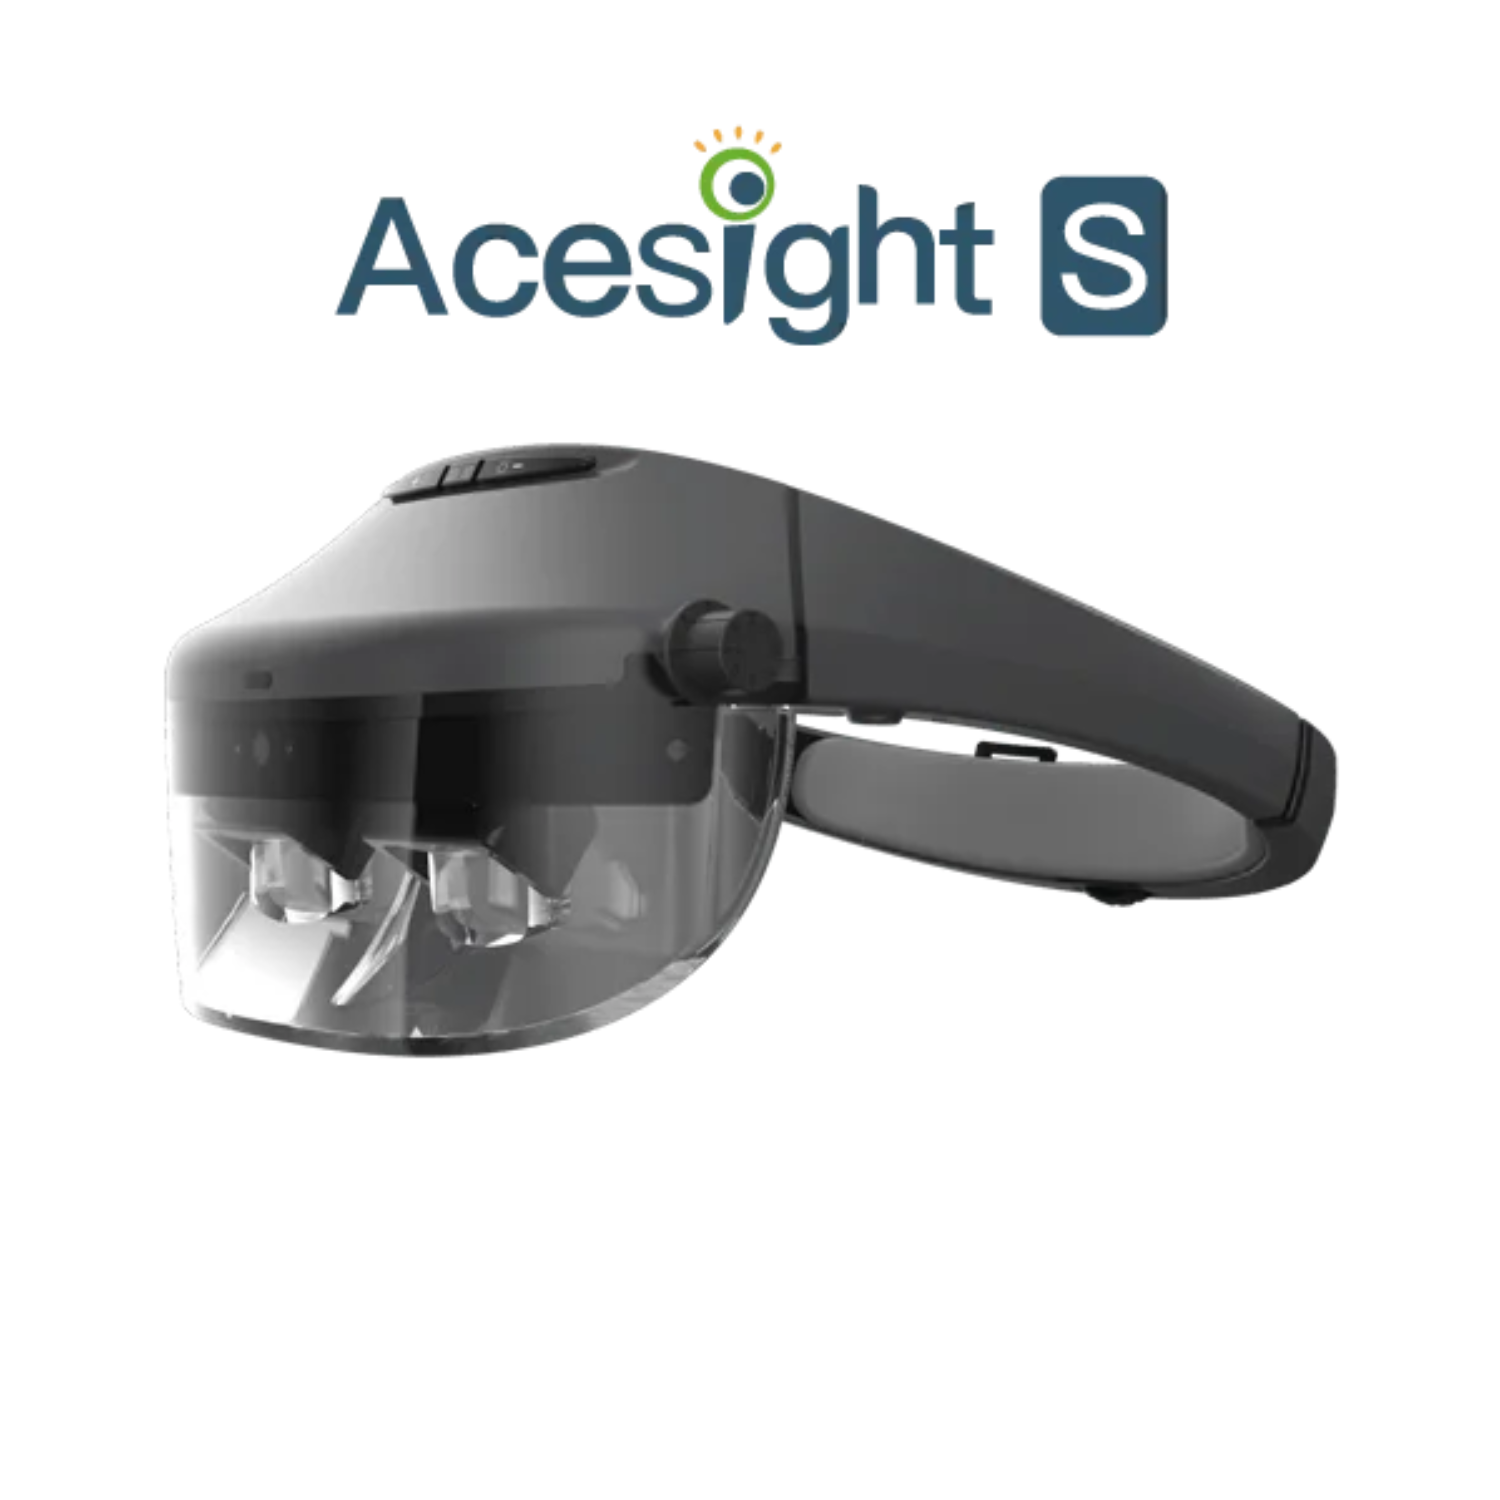 Image of side view of the Acesight S augmented reality glasses from Zoomax USA